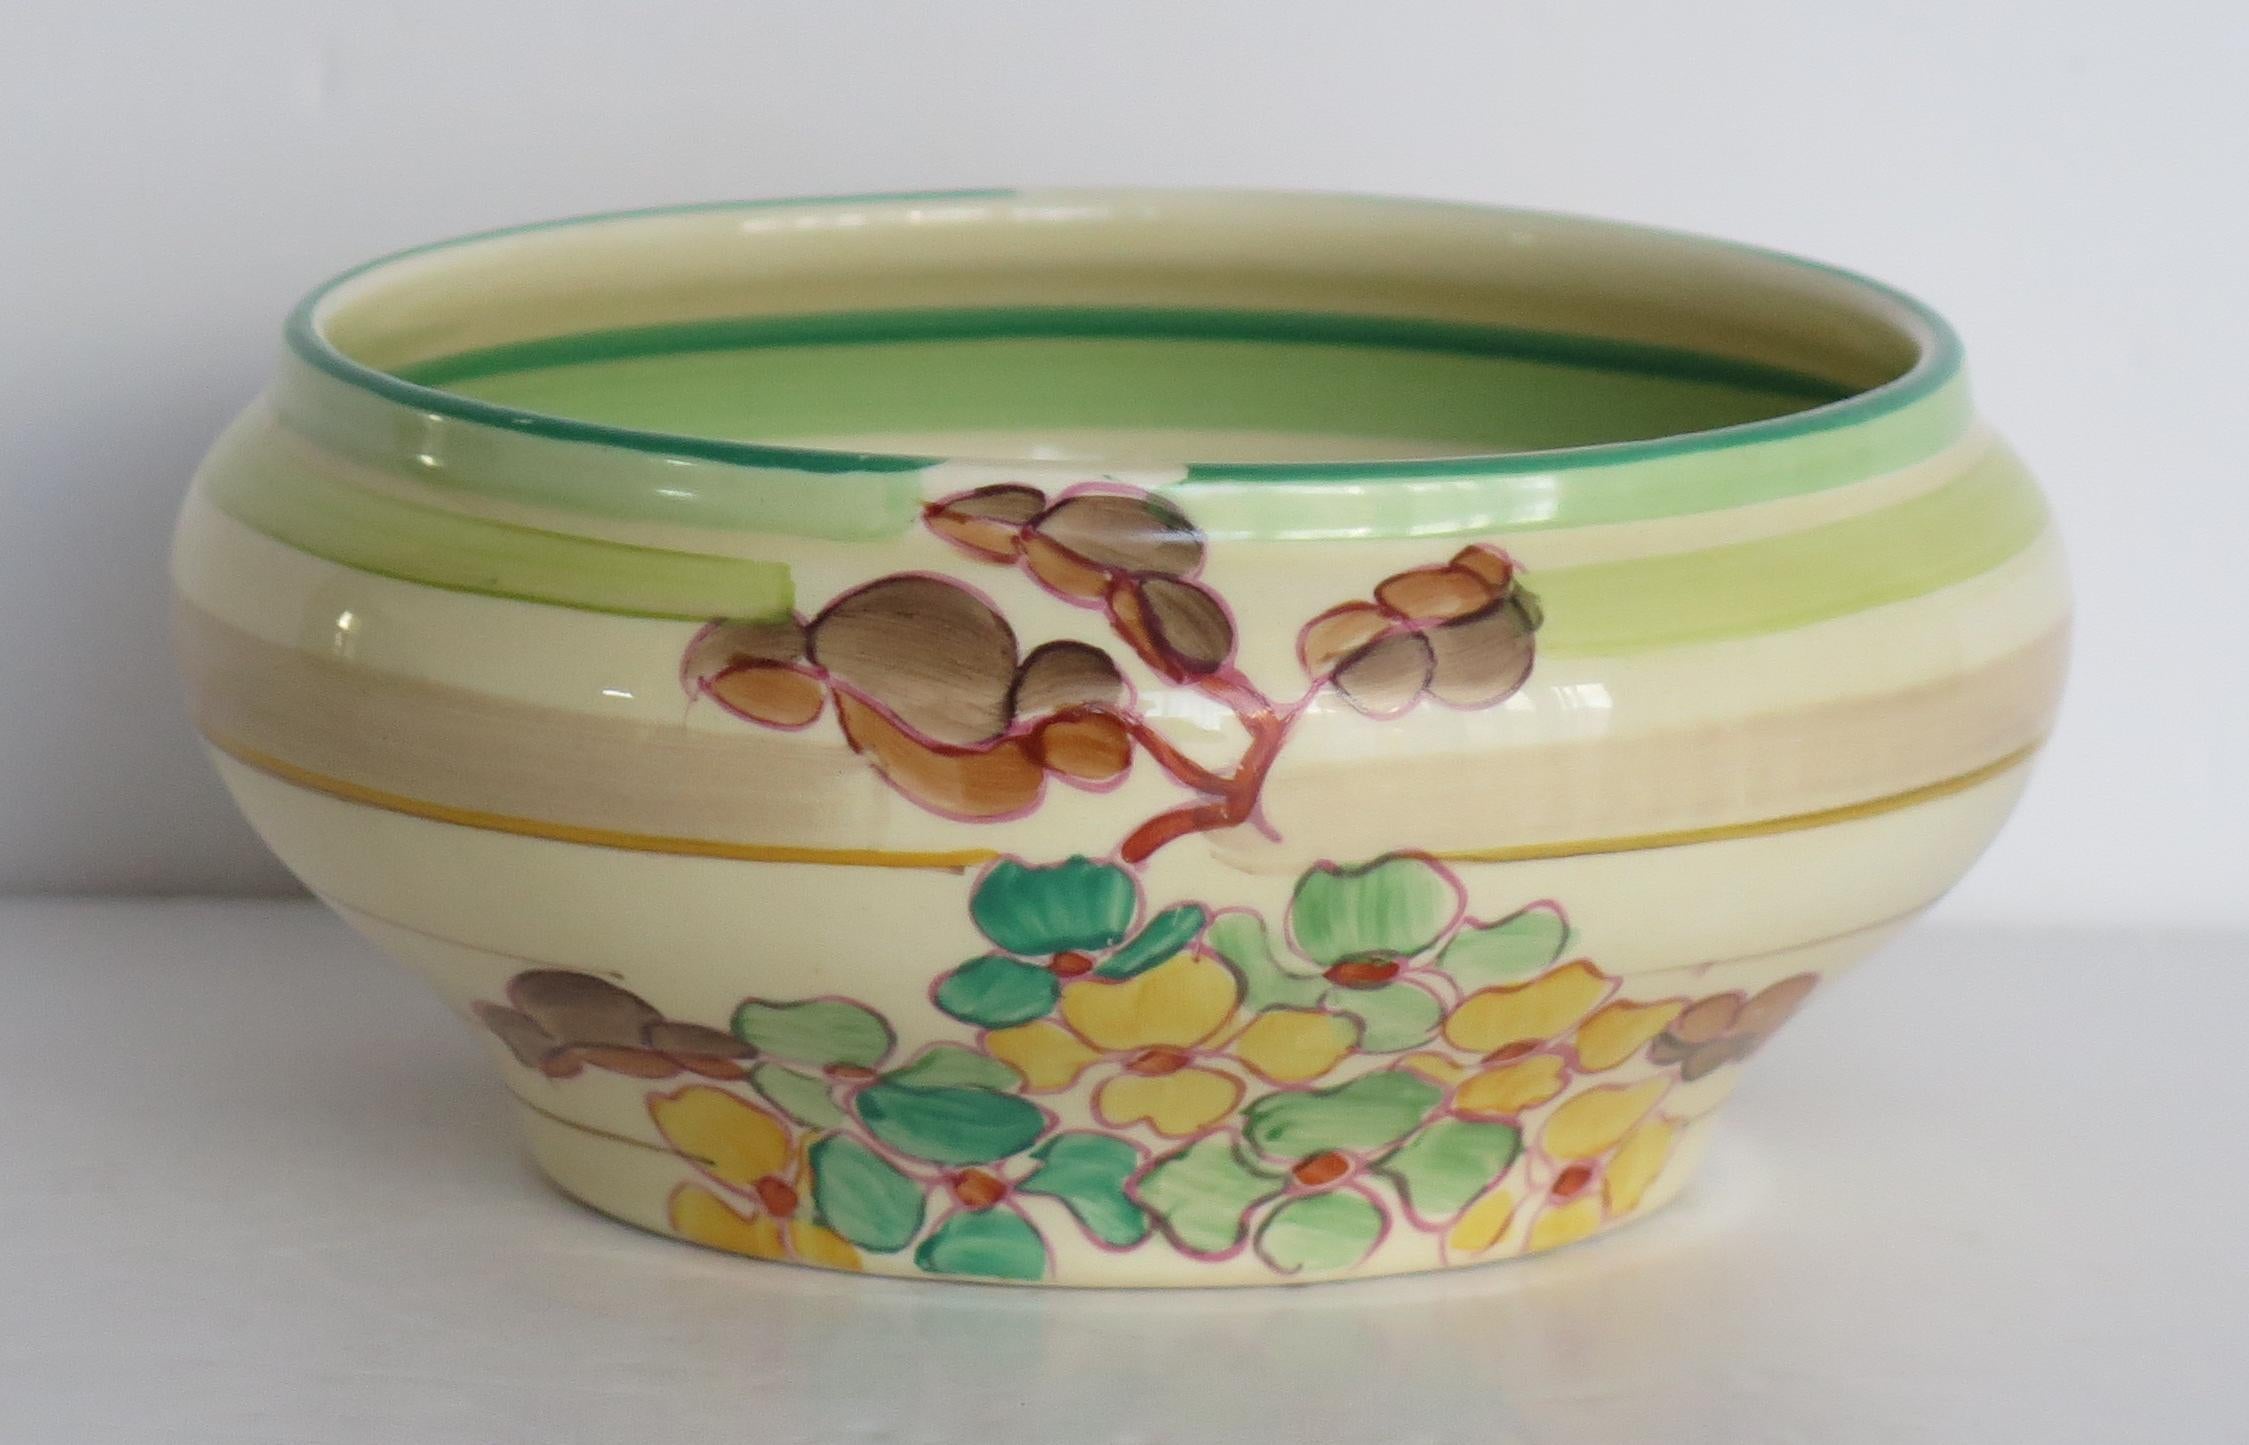 This is a bowl by Clarice Cliff in the 